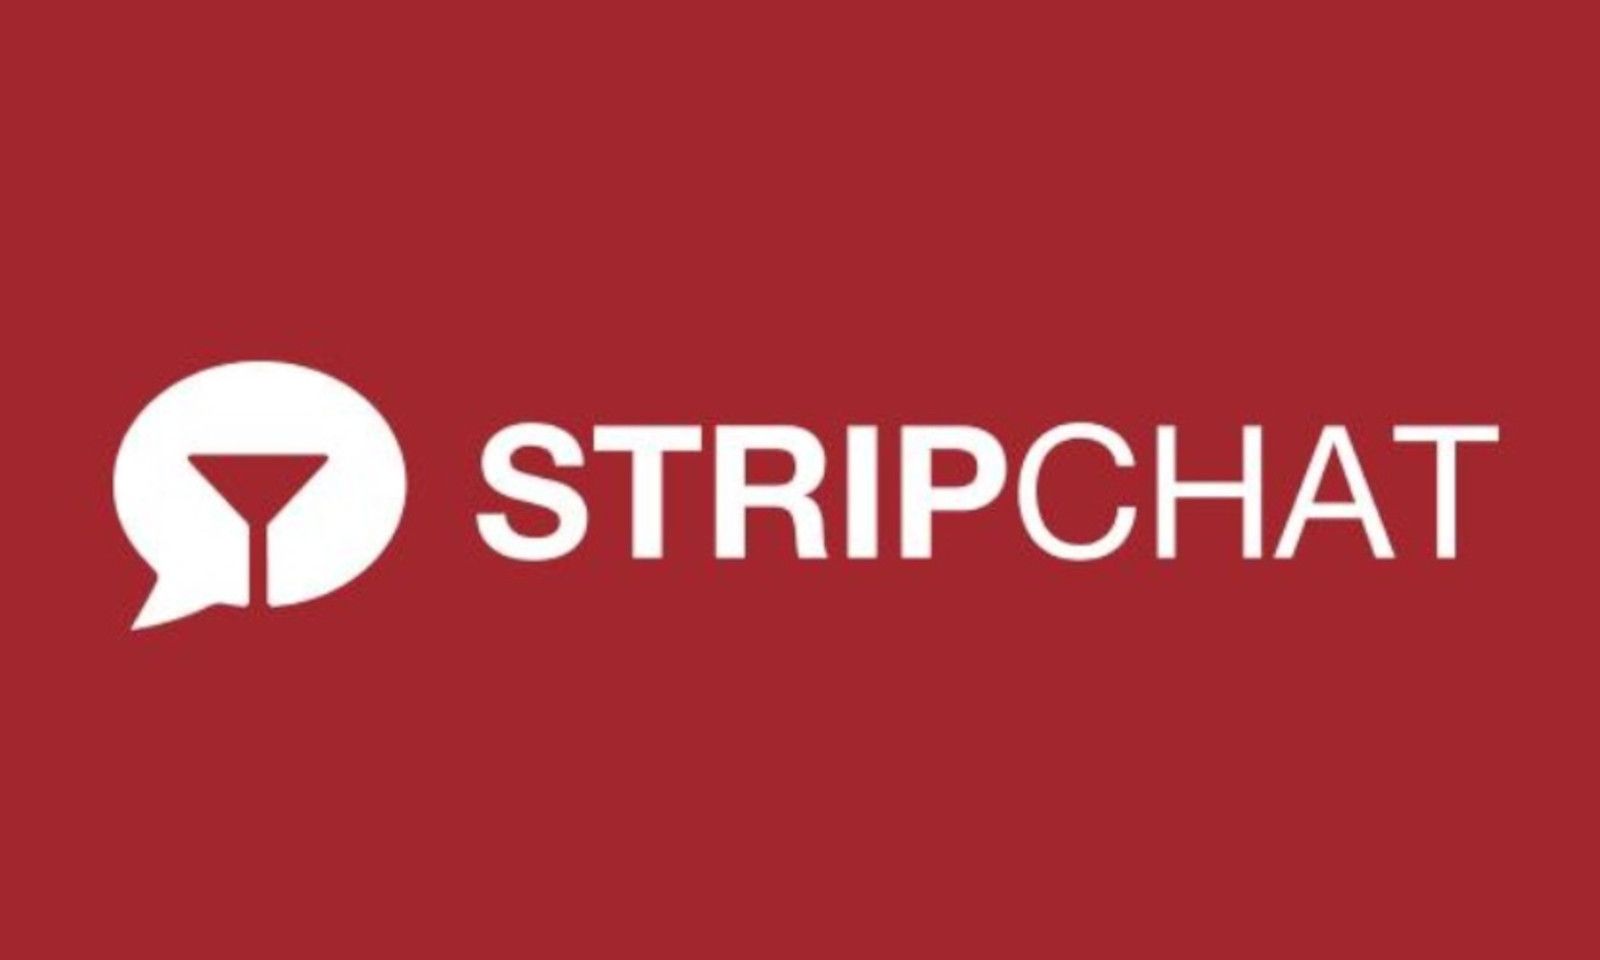 Stripchat Voted ‘Most Loved’ by Models in 2020 Cam Survey